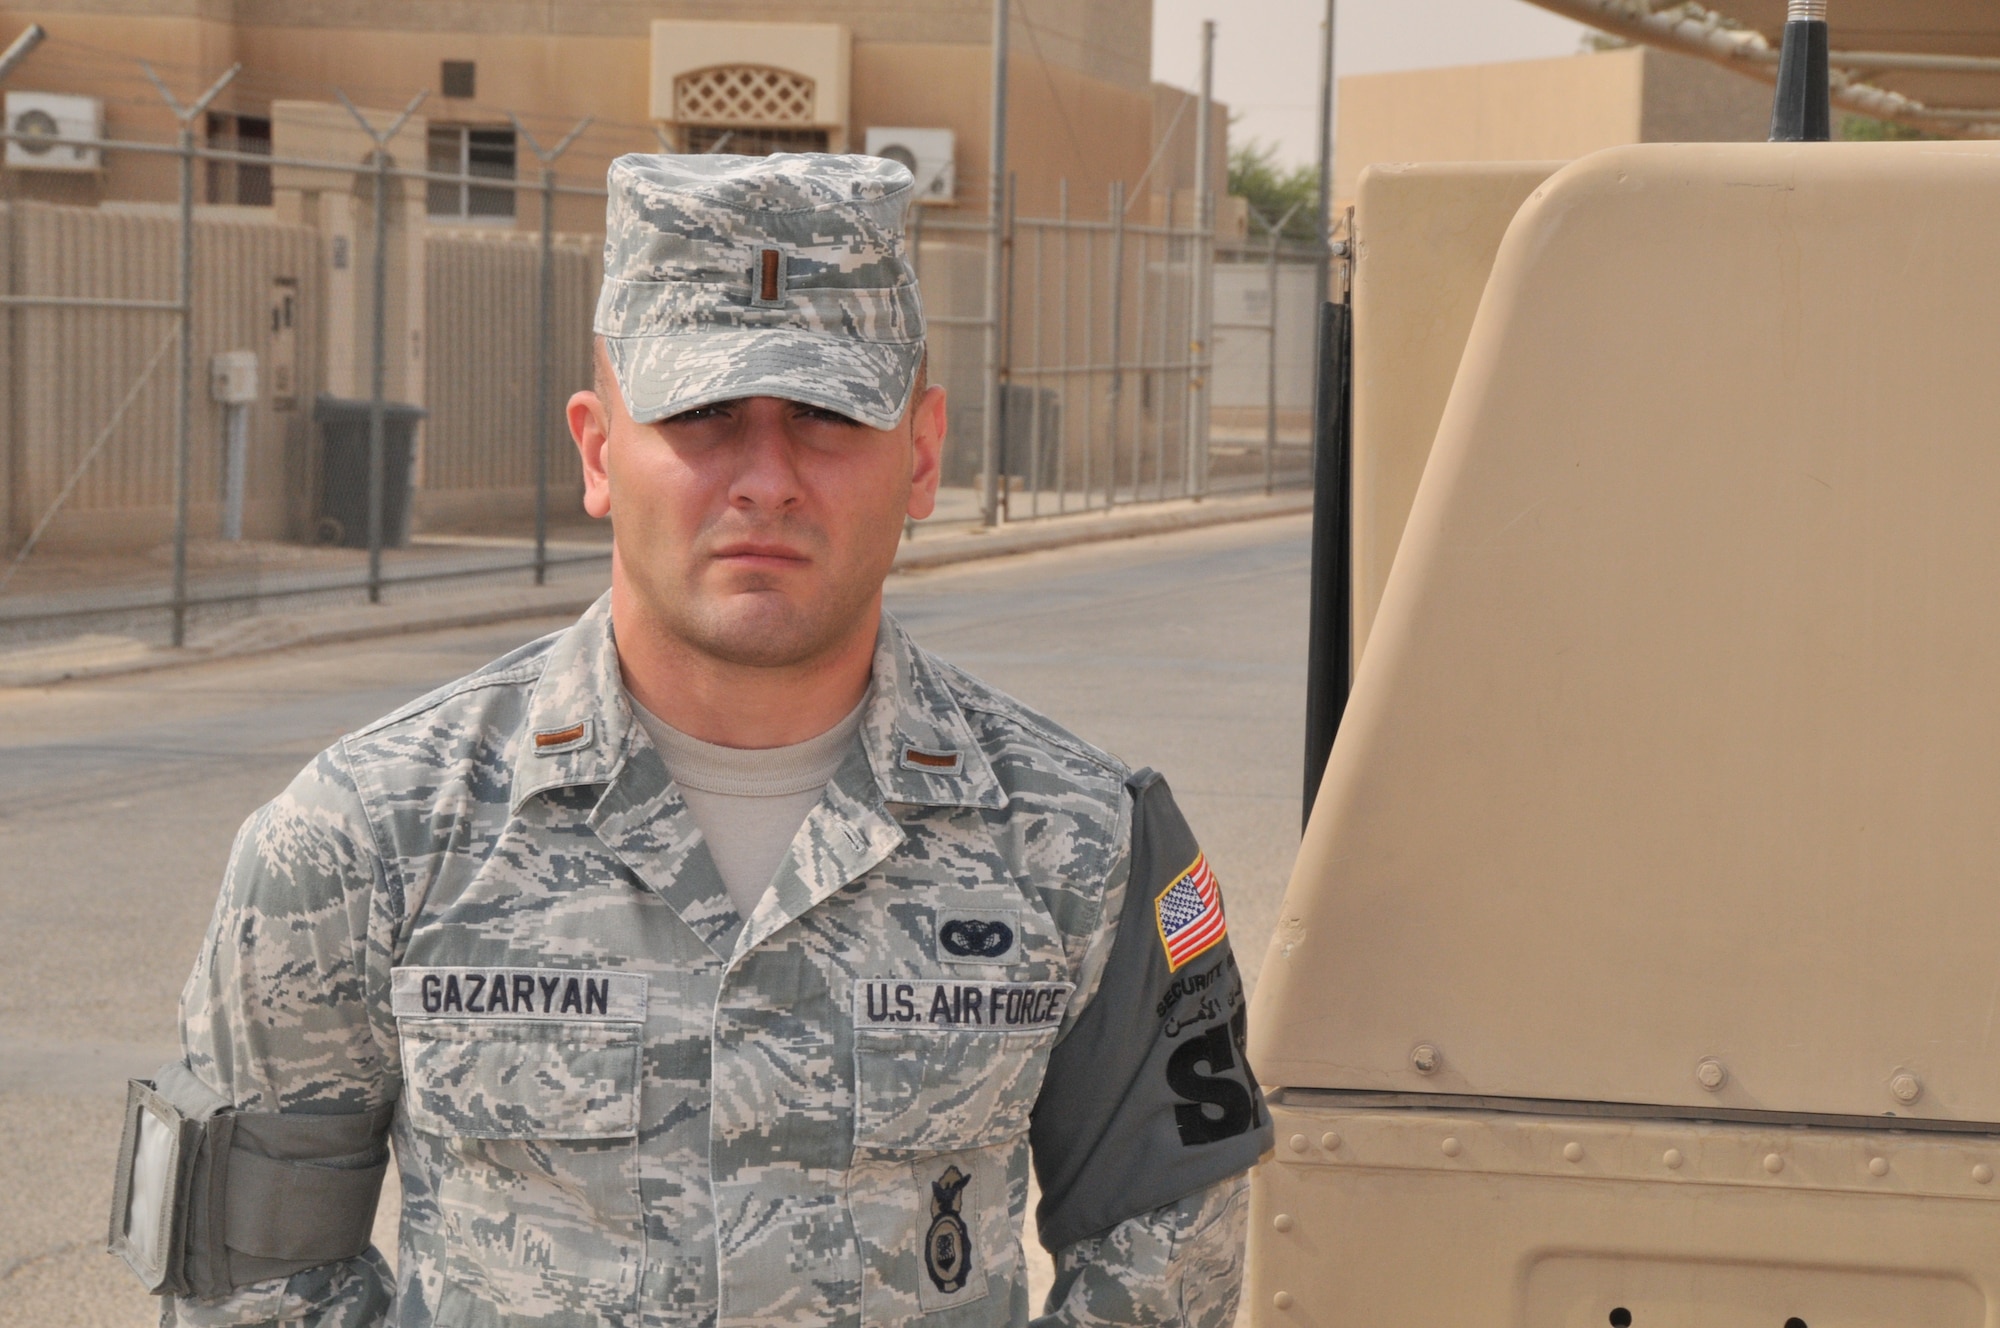 2nd Lt. Konstantin Gazaryan of the 64th Expeditionary Security Forces Squadron, deployed from Offutt Air Force Base, Neb., says his reason for serving in the military is that it wouldn’t be right if he didn’t stand up and answer the call when his country needed him most, after his country was there for him. The lieutenant immigrated to the United States at the age of eight after being forced out of his birth country, Azerbaijan, during a time he and many news sources describe as genocide. (U.S. Air Force photo/ Master Sgt. Mike Hammond)